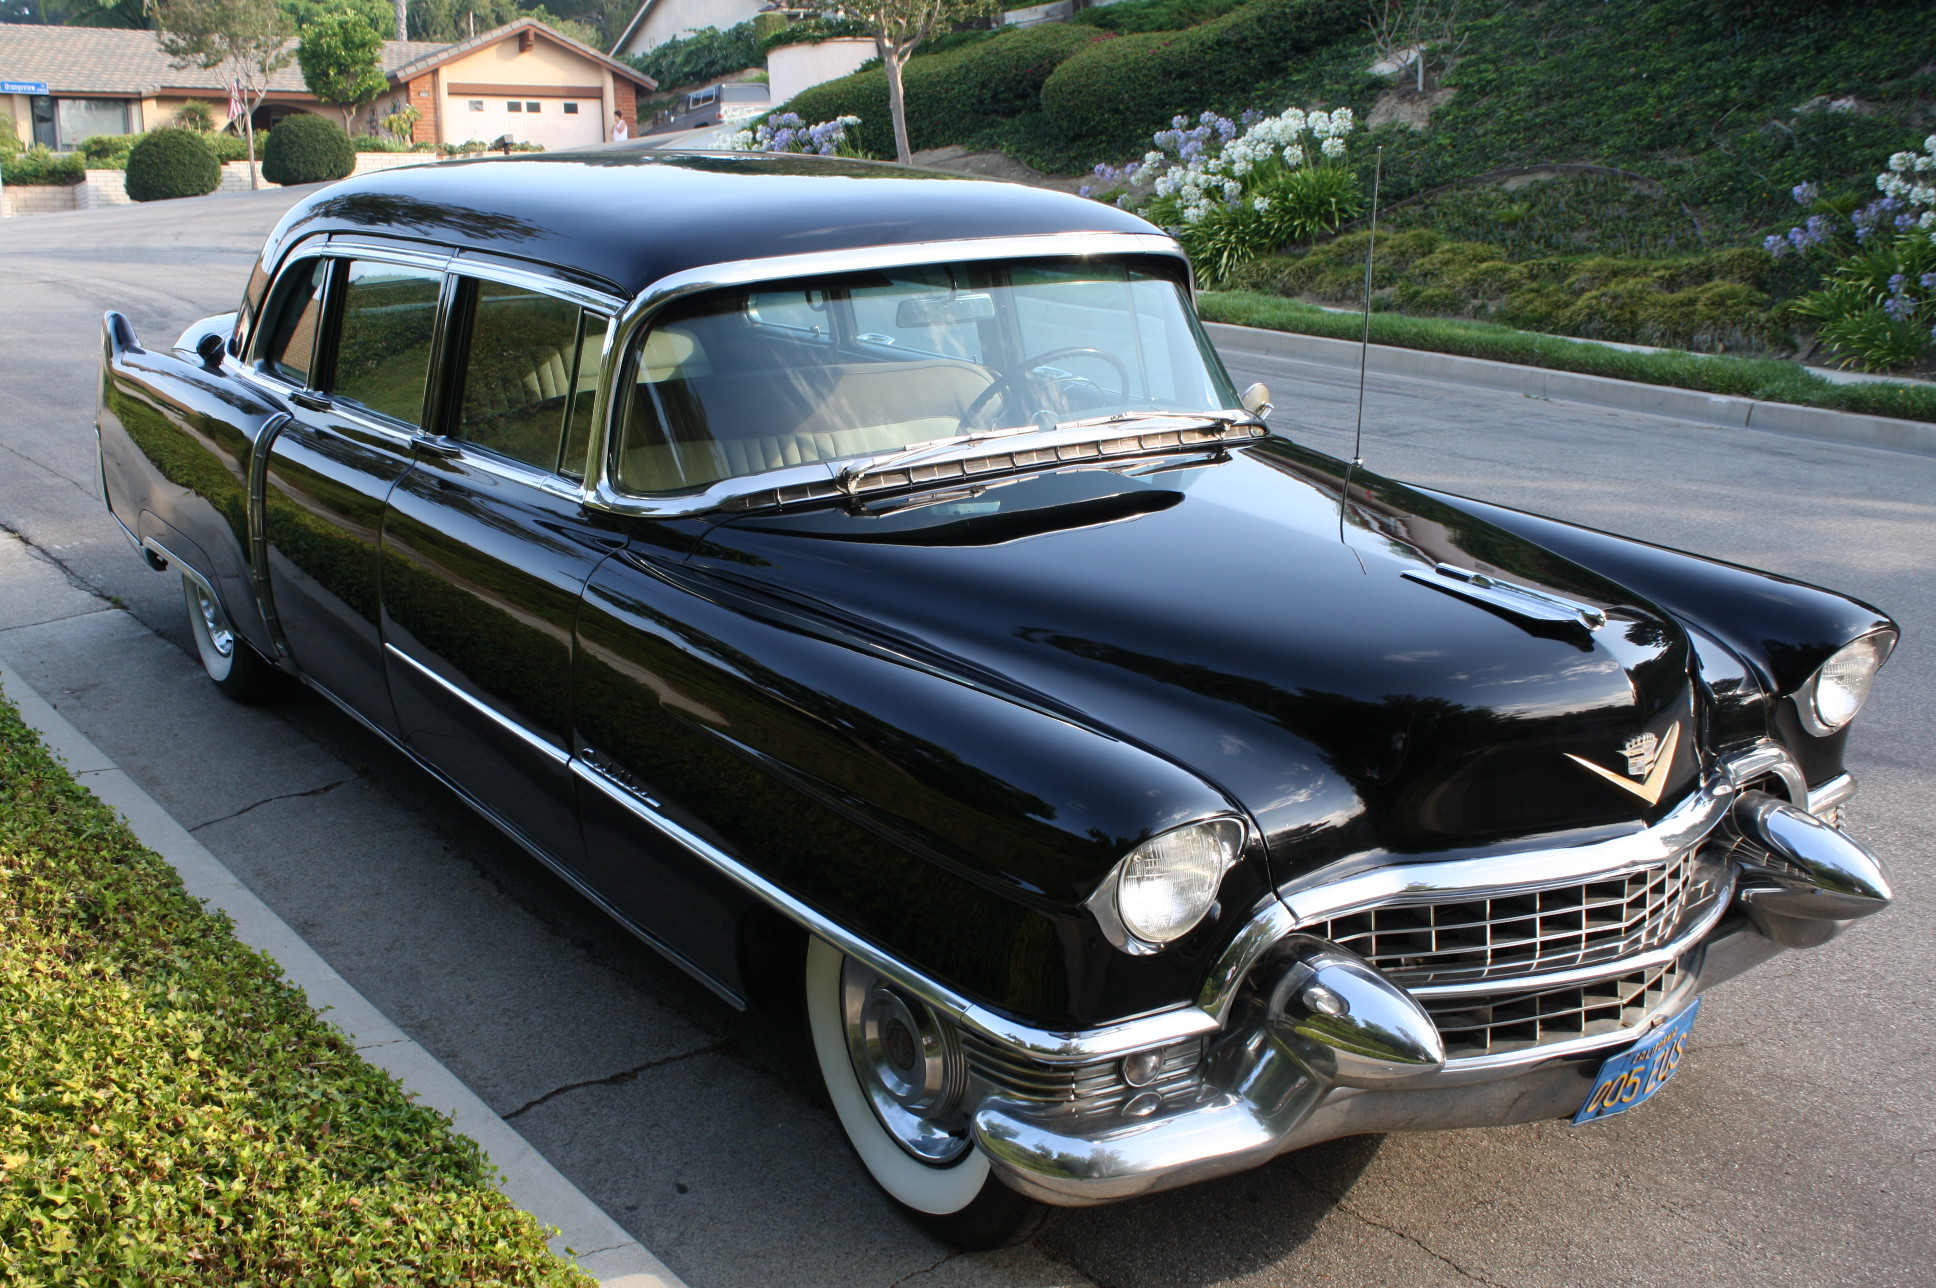 Here is the 1955 Cadillac